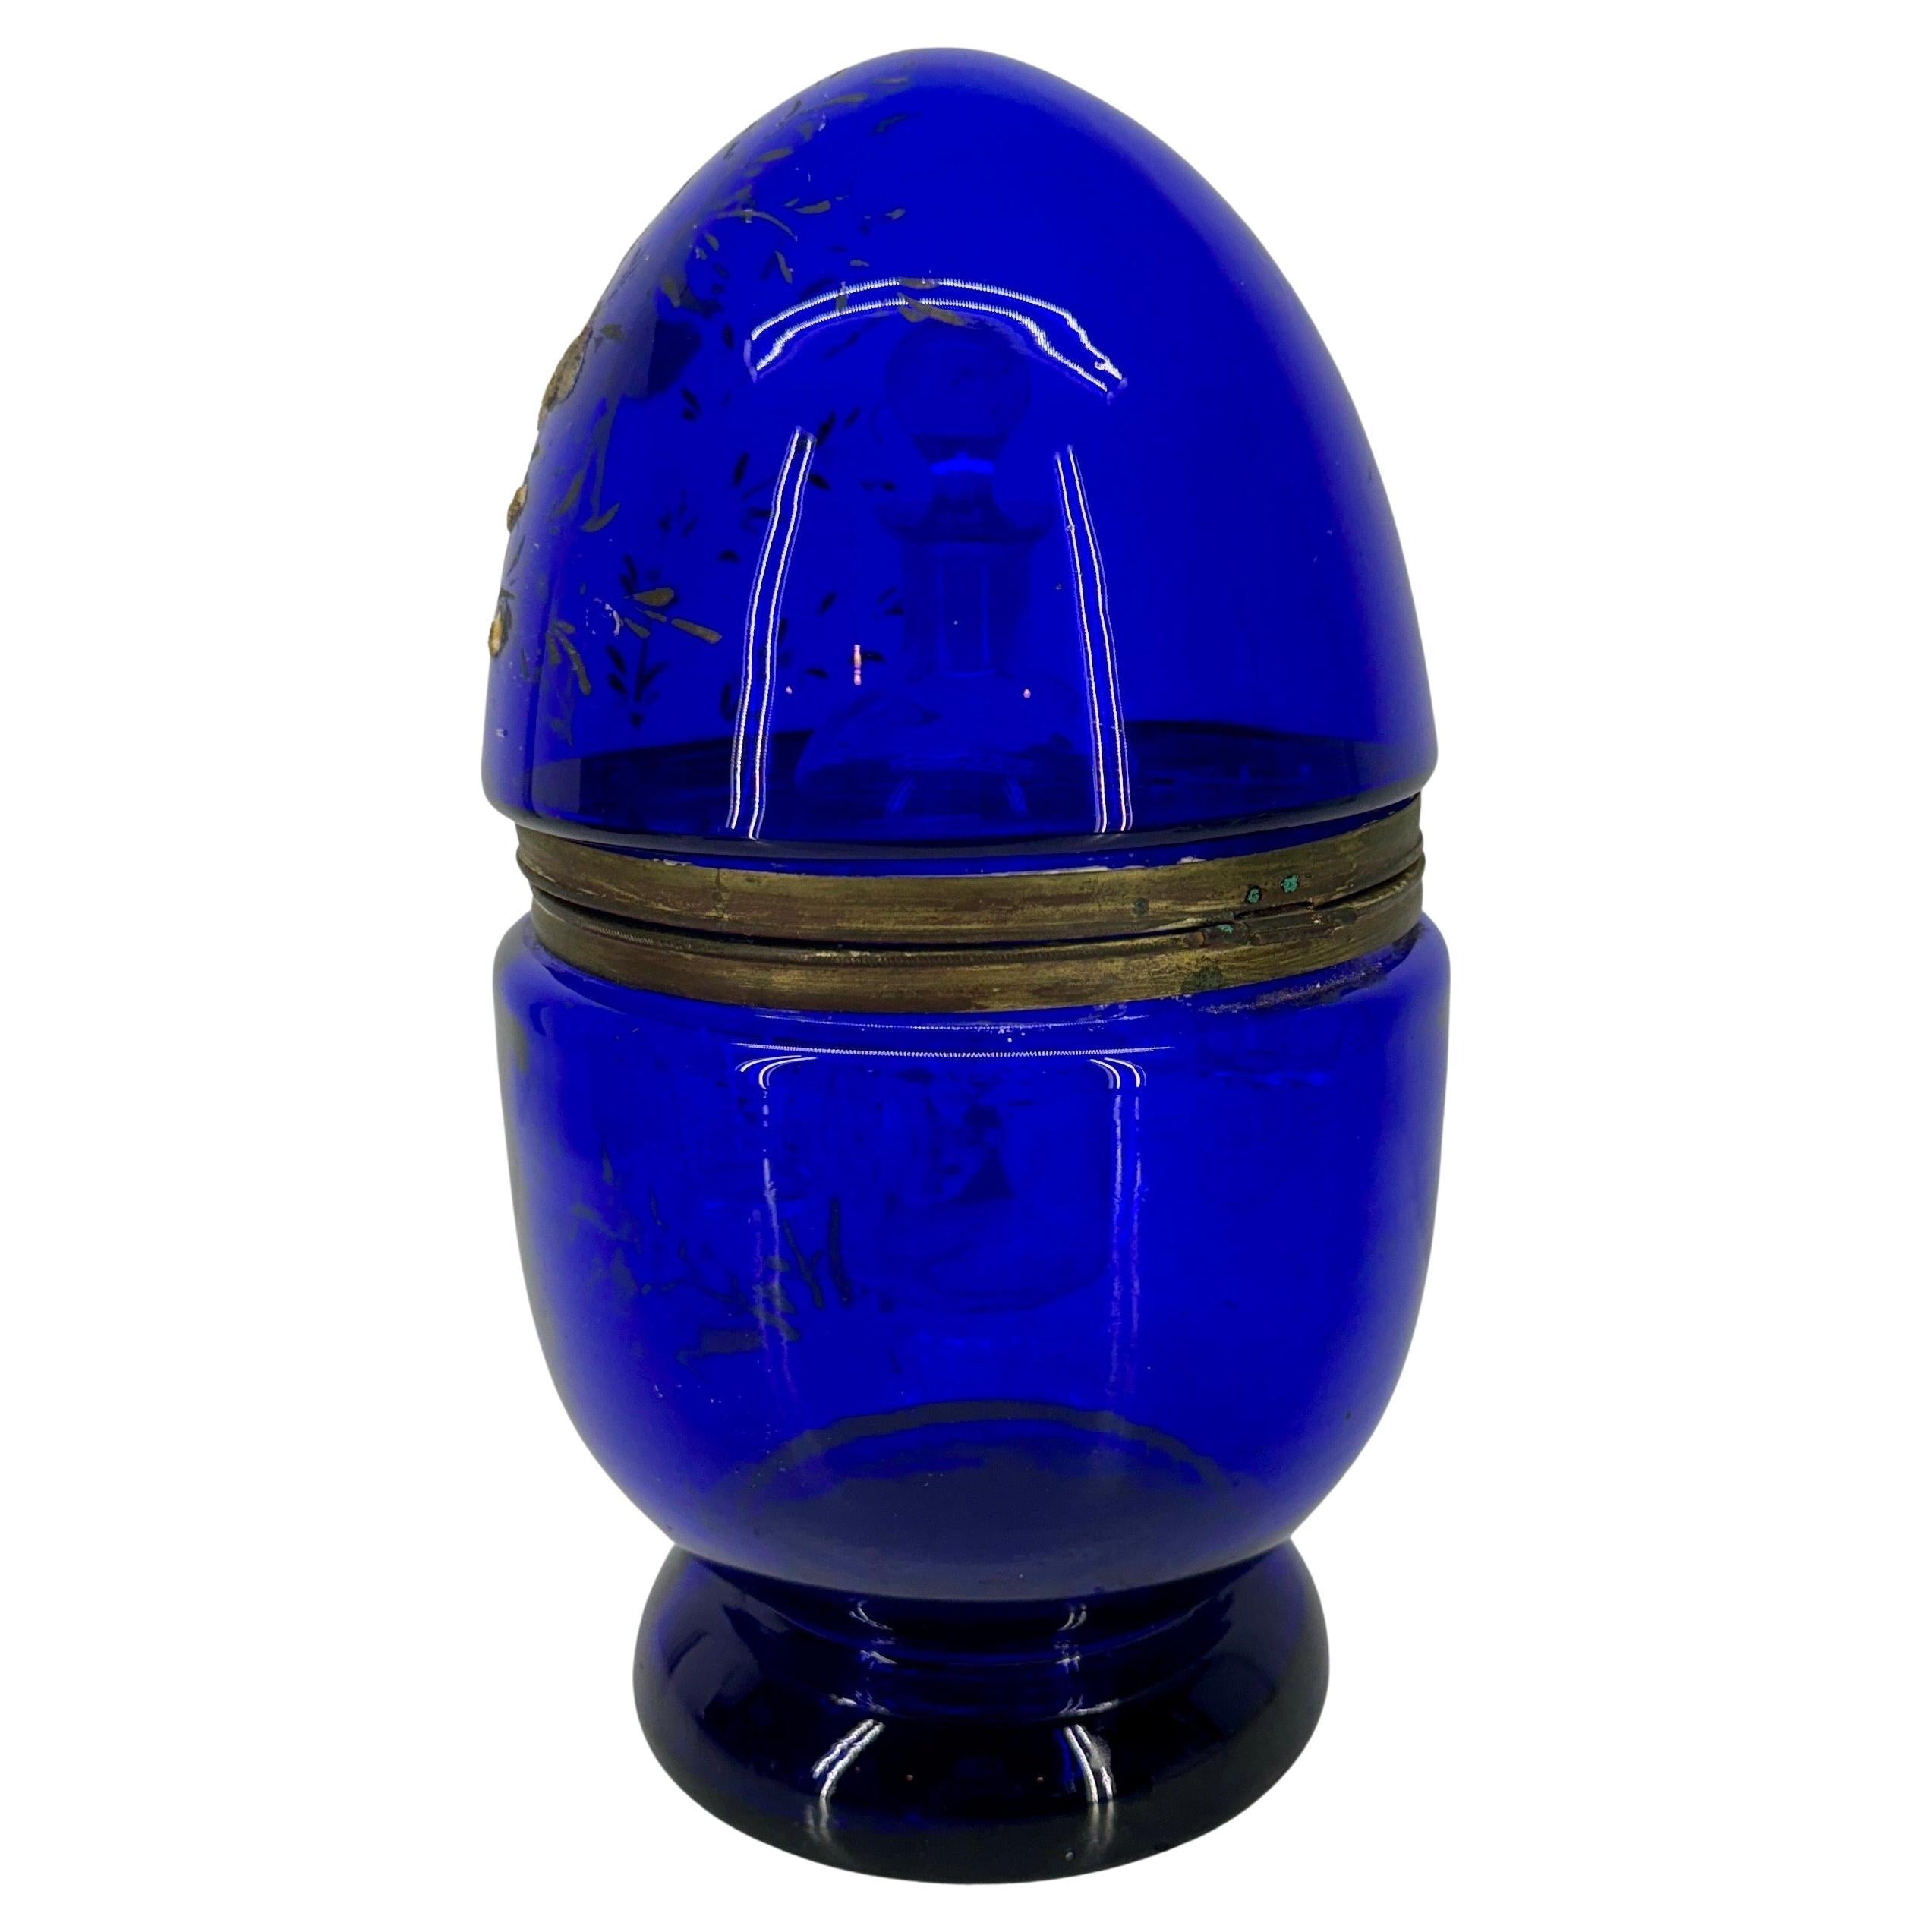 Hand-Crafted Vintage Blue Glass Art Egg Domed Decanter, 1950's For Sale